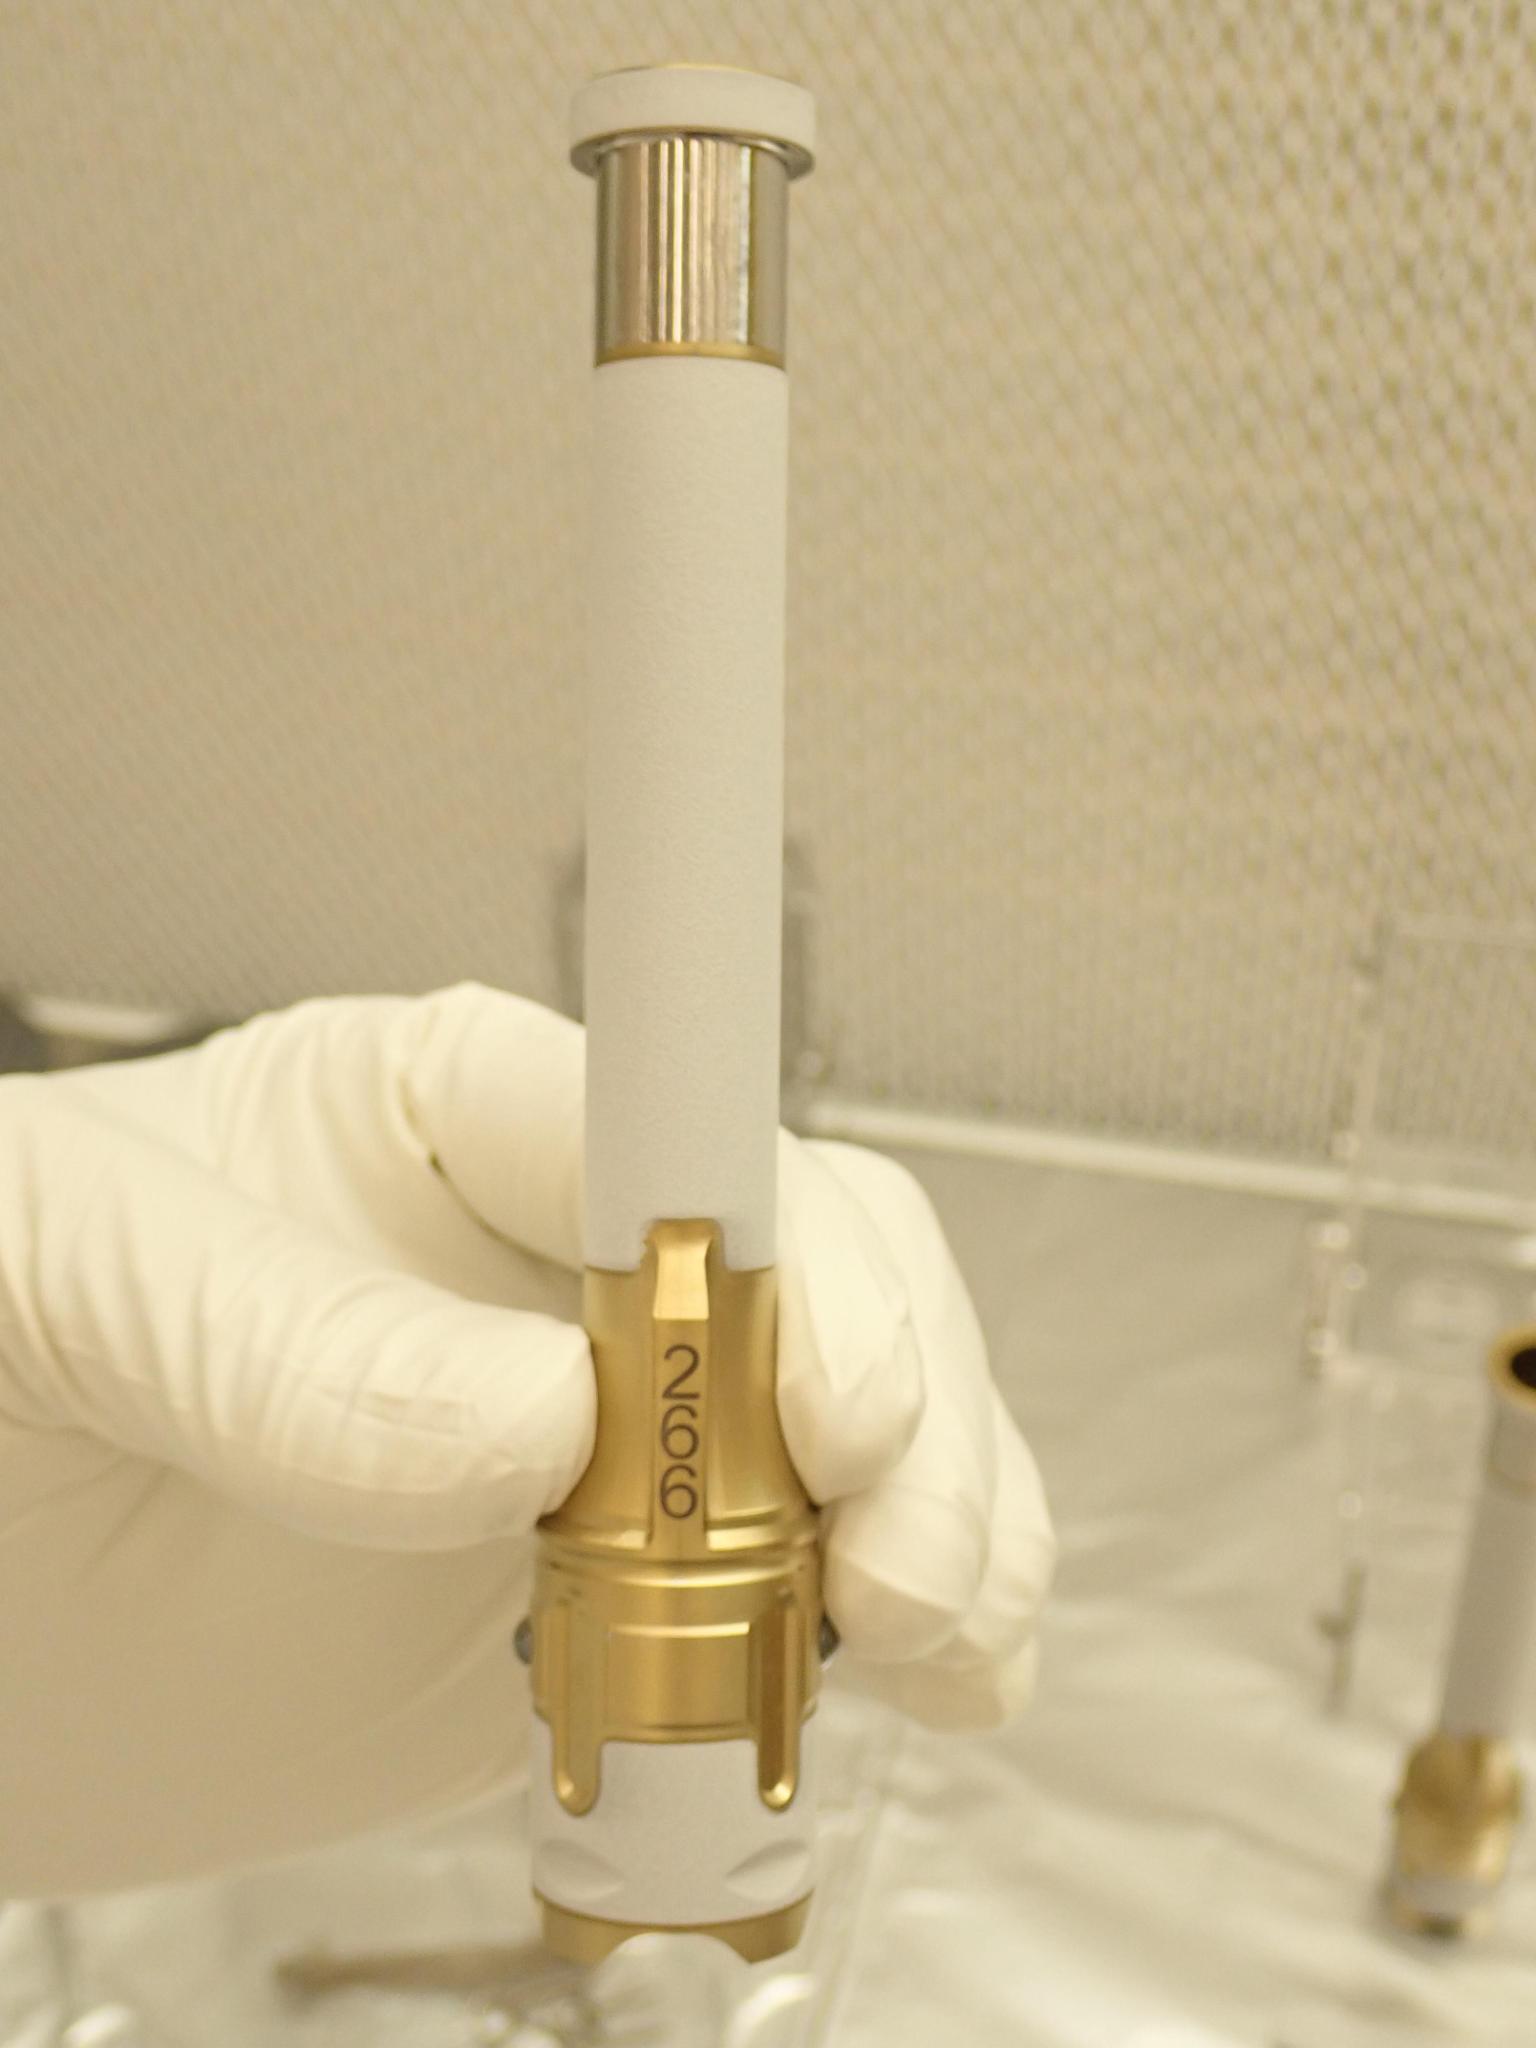 Sample tube number 266 was used to collect the first sample of Martian rock by NASA's Perseverance rover. The laser-etched serial number helps science team identify the tubes and their contents.